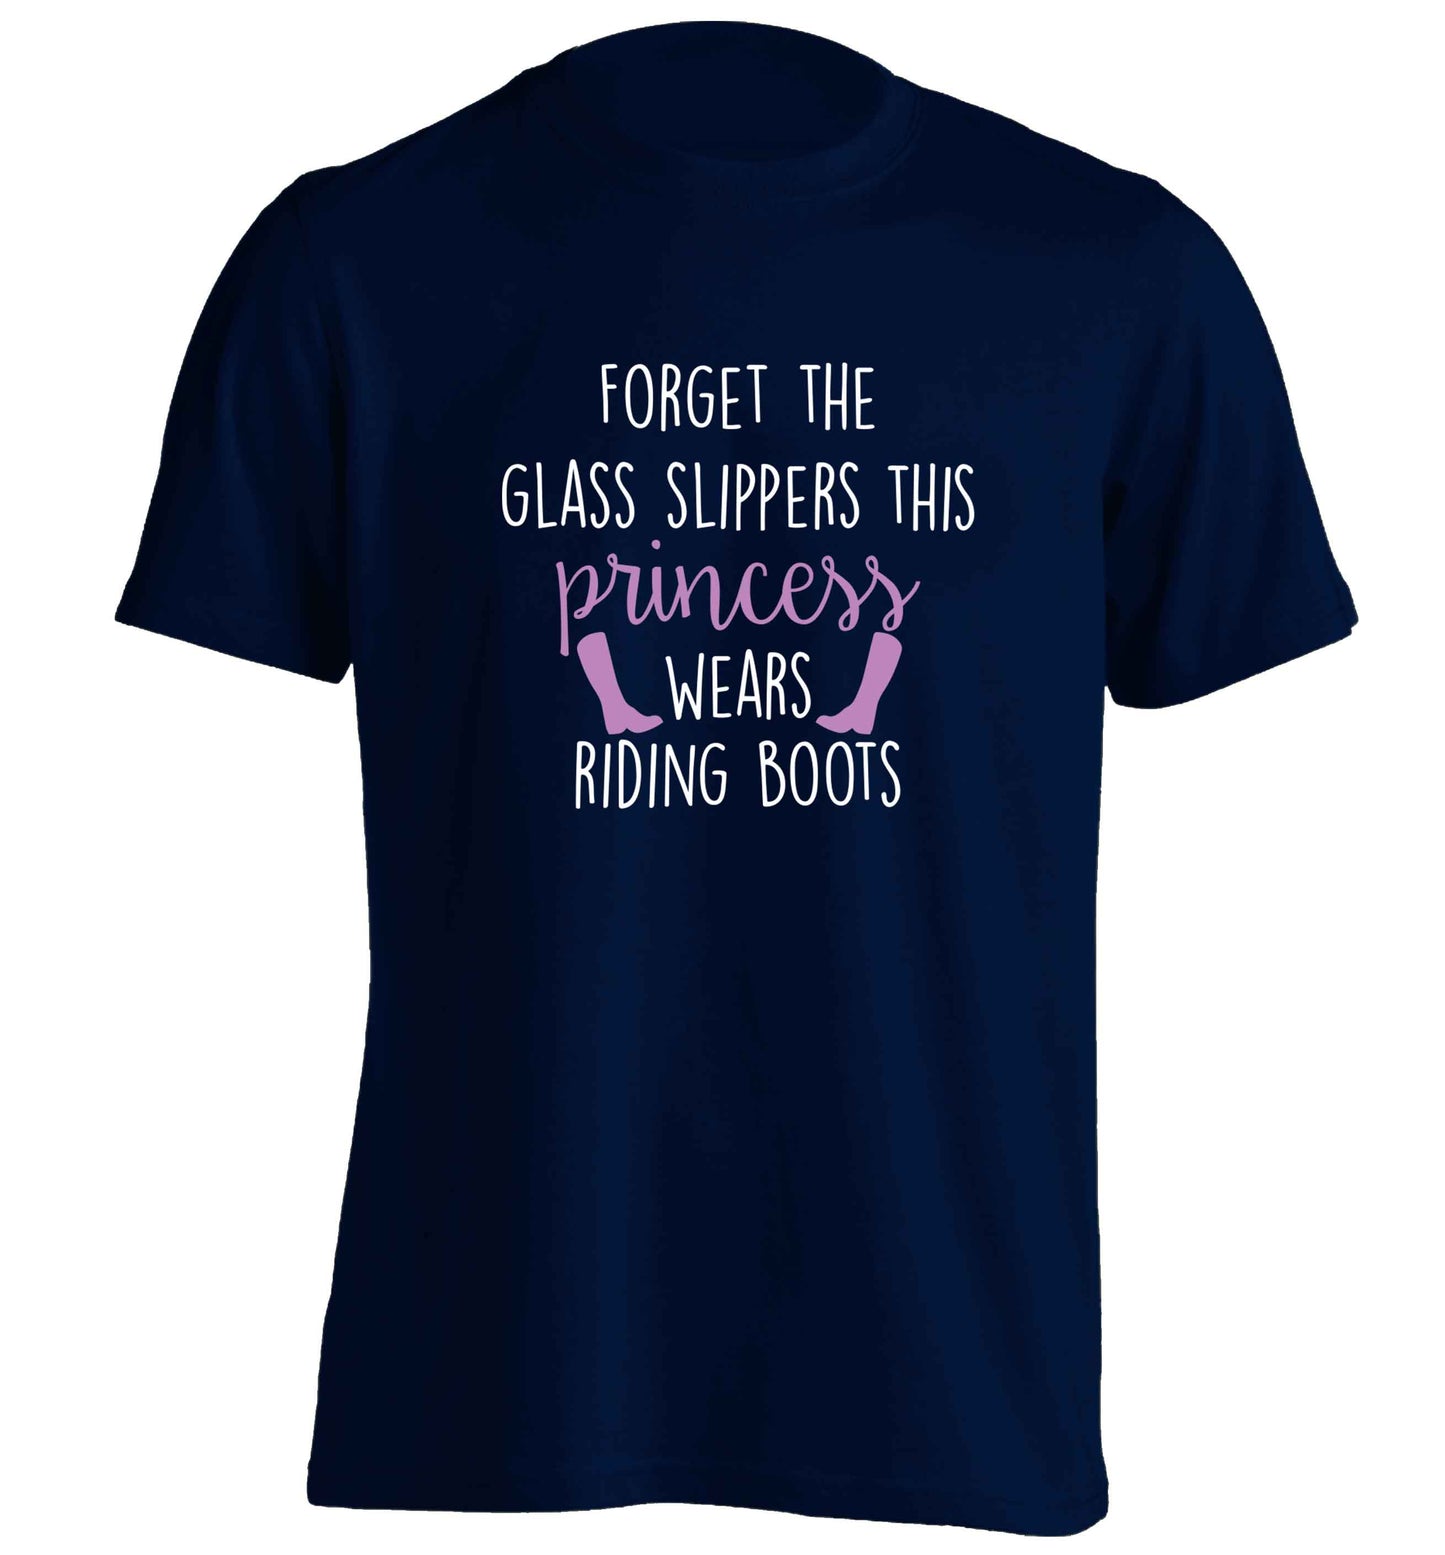 Forget the glass slippers this princess wears riding boots adults unisex navy Tshirt 2XL